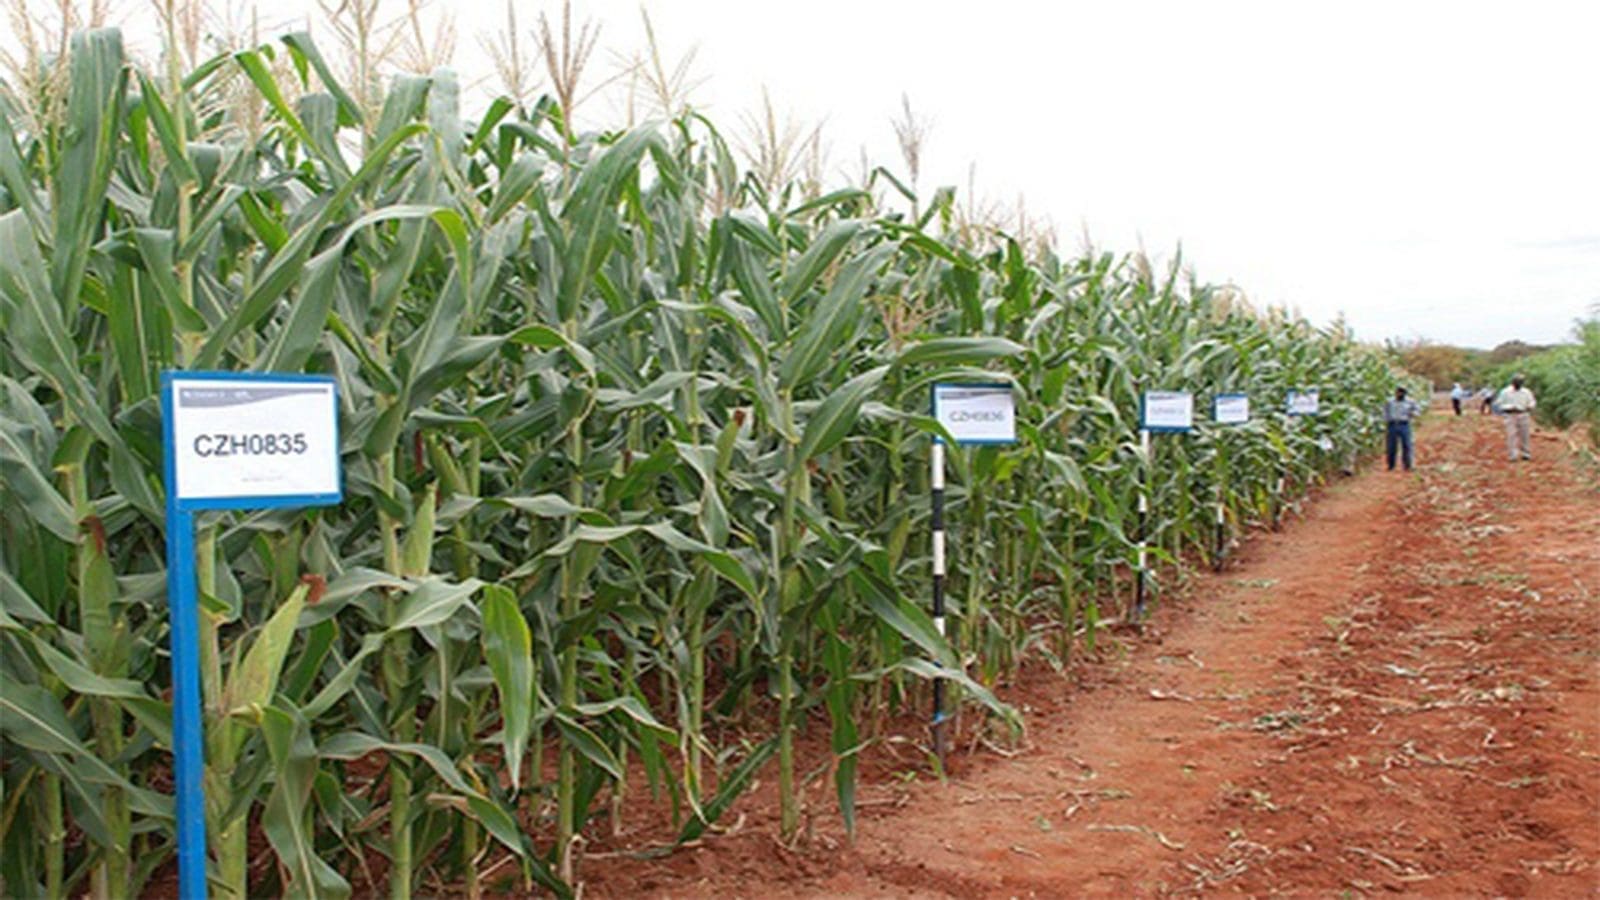 Kenya to approve release of new maize varieties resistant to fall armyworm